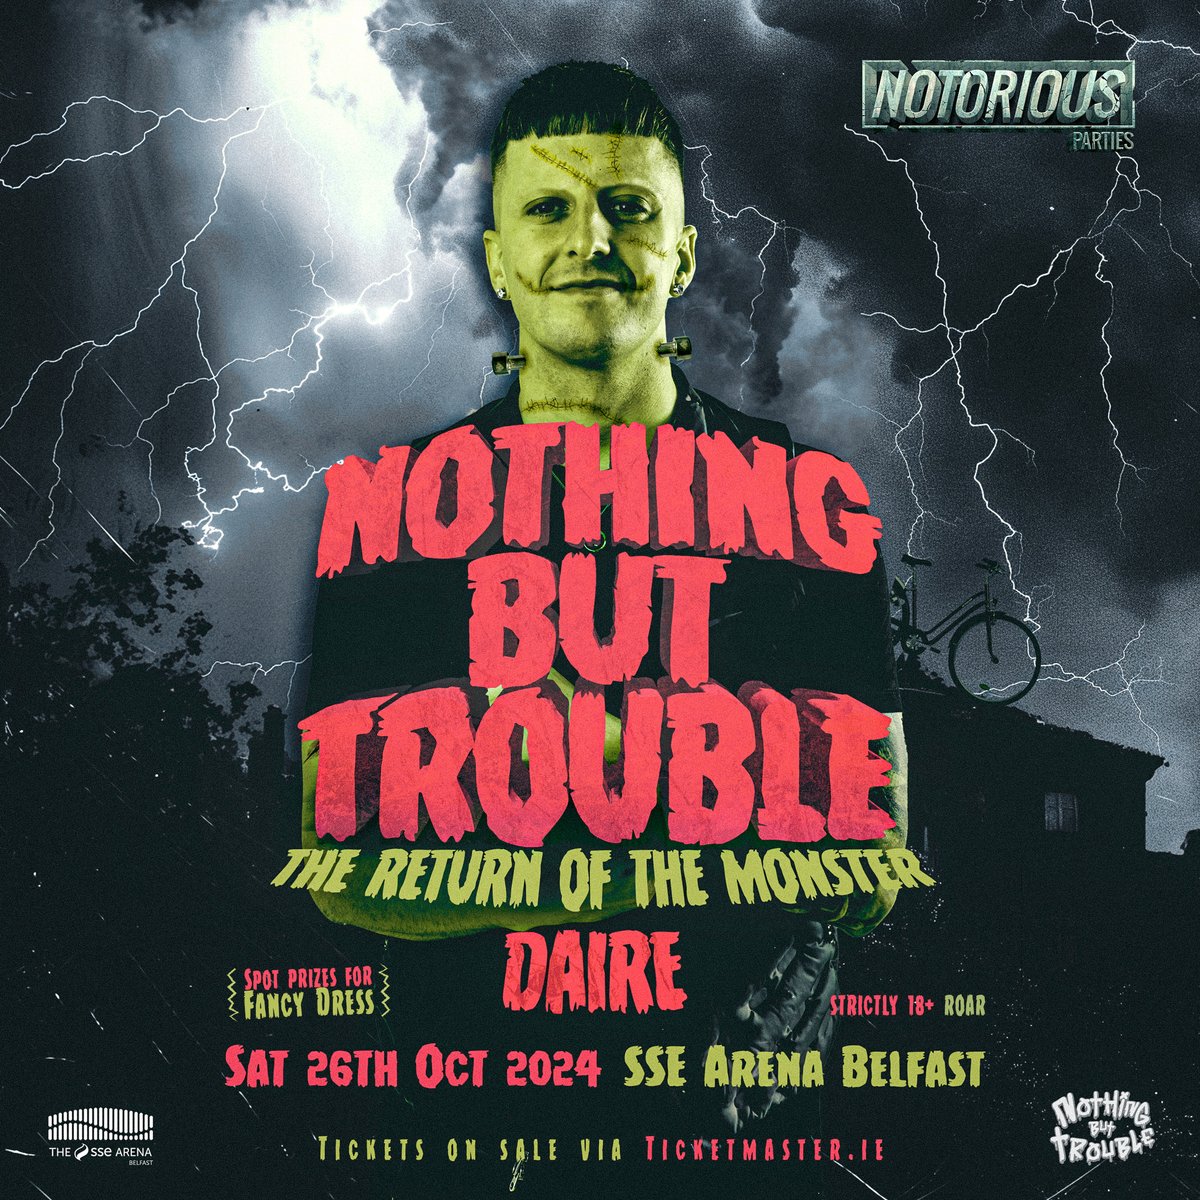 𝗢𝗡 𝗦𝗔𝗟𝗘 𝗡𝗢𝗪: Tickets for DAIRE's 'Nothing But Trouble With Daire' show at @SSEBelfastArena on 26 October 2024 are available now. 🎟️ > bit.ly/3UQEEHY